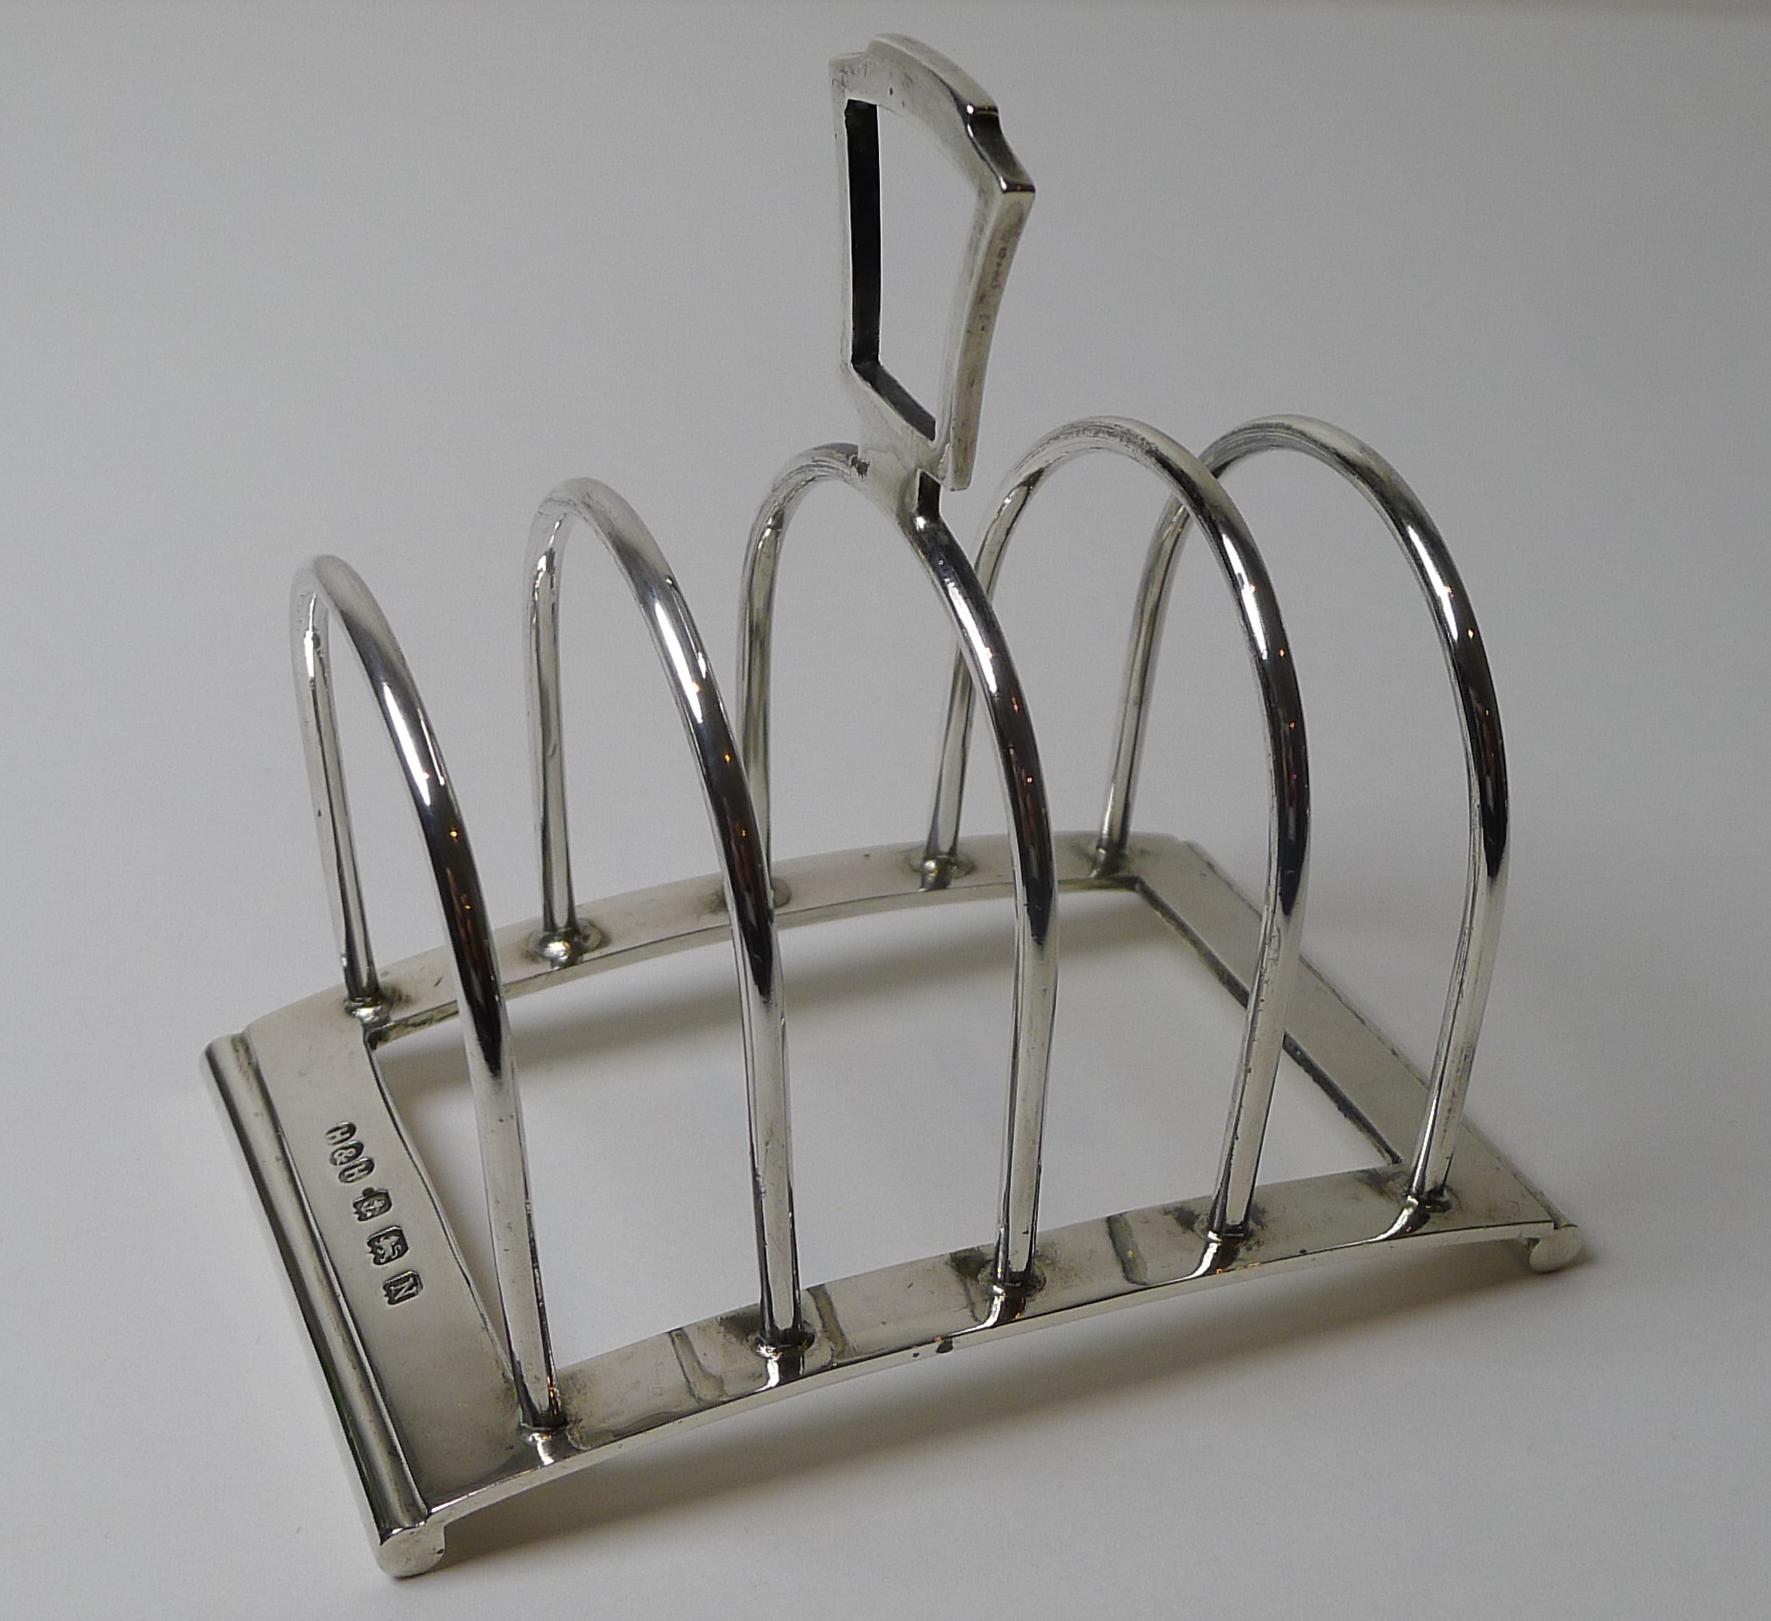 A wonderful little toast rack which would look equally impressive on a smart desk-top to organise small papers, business cards etc.

Made from solid English sterling silver it was made by the highly collectable and sought-after silversmith, Hukin